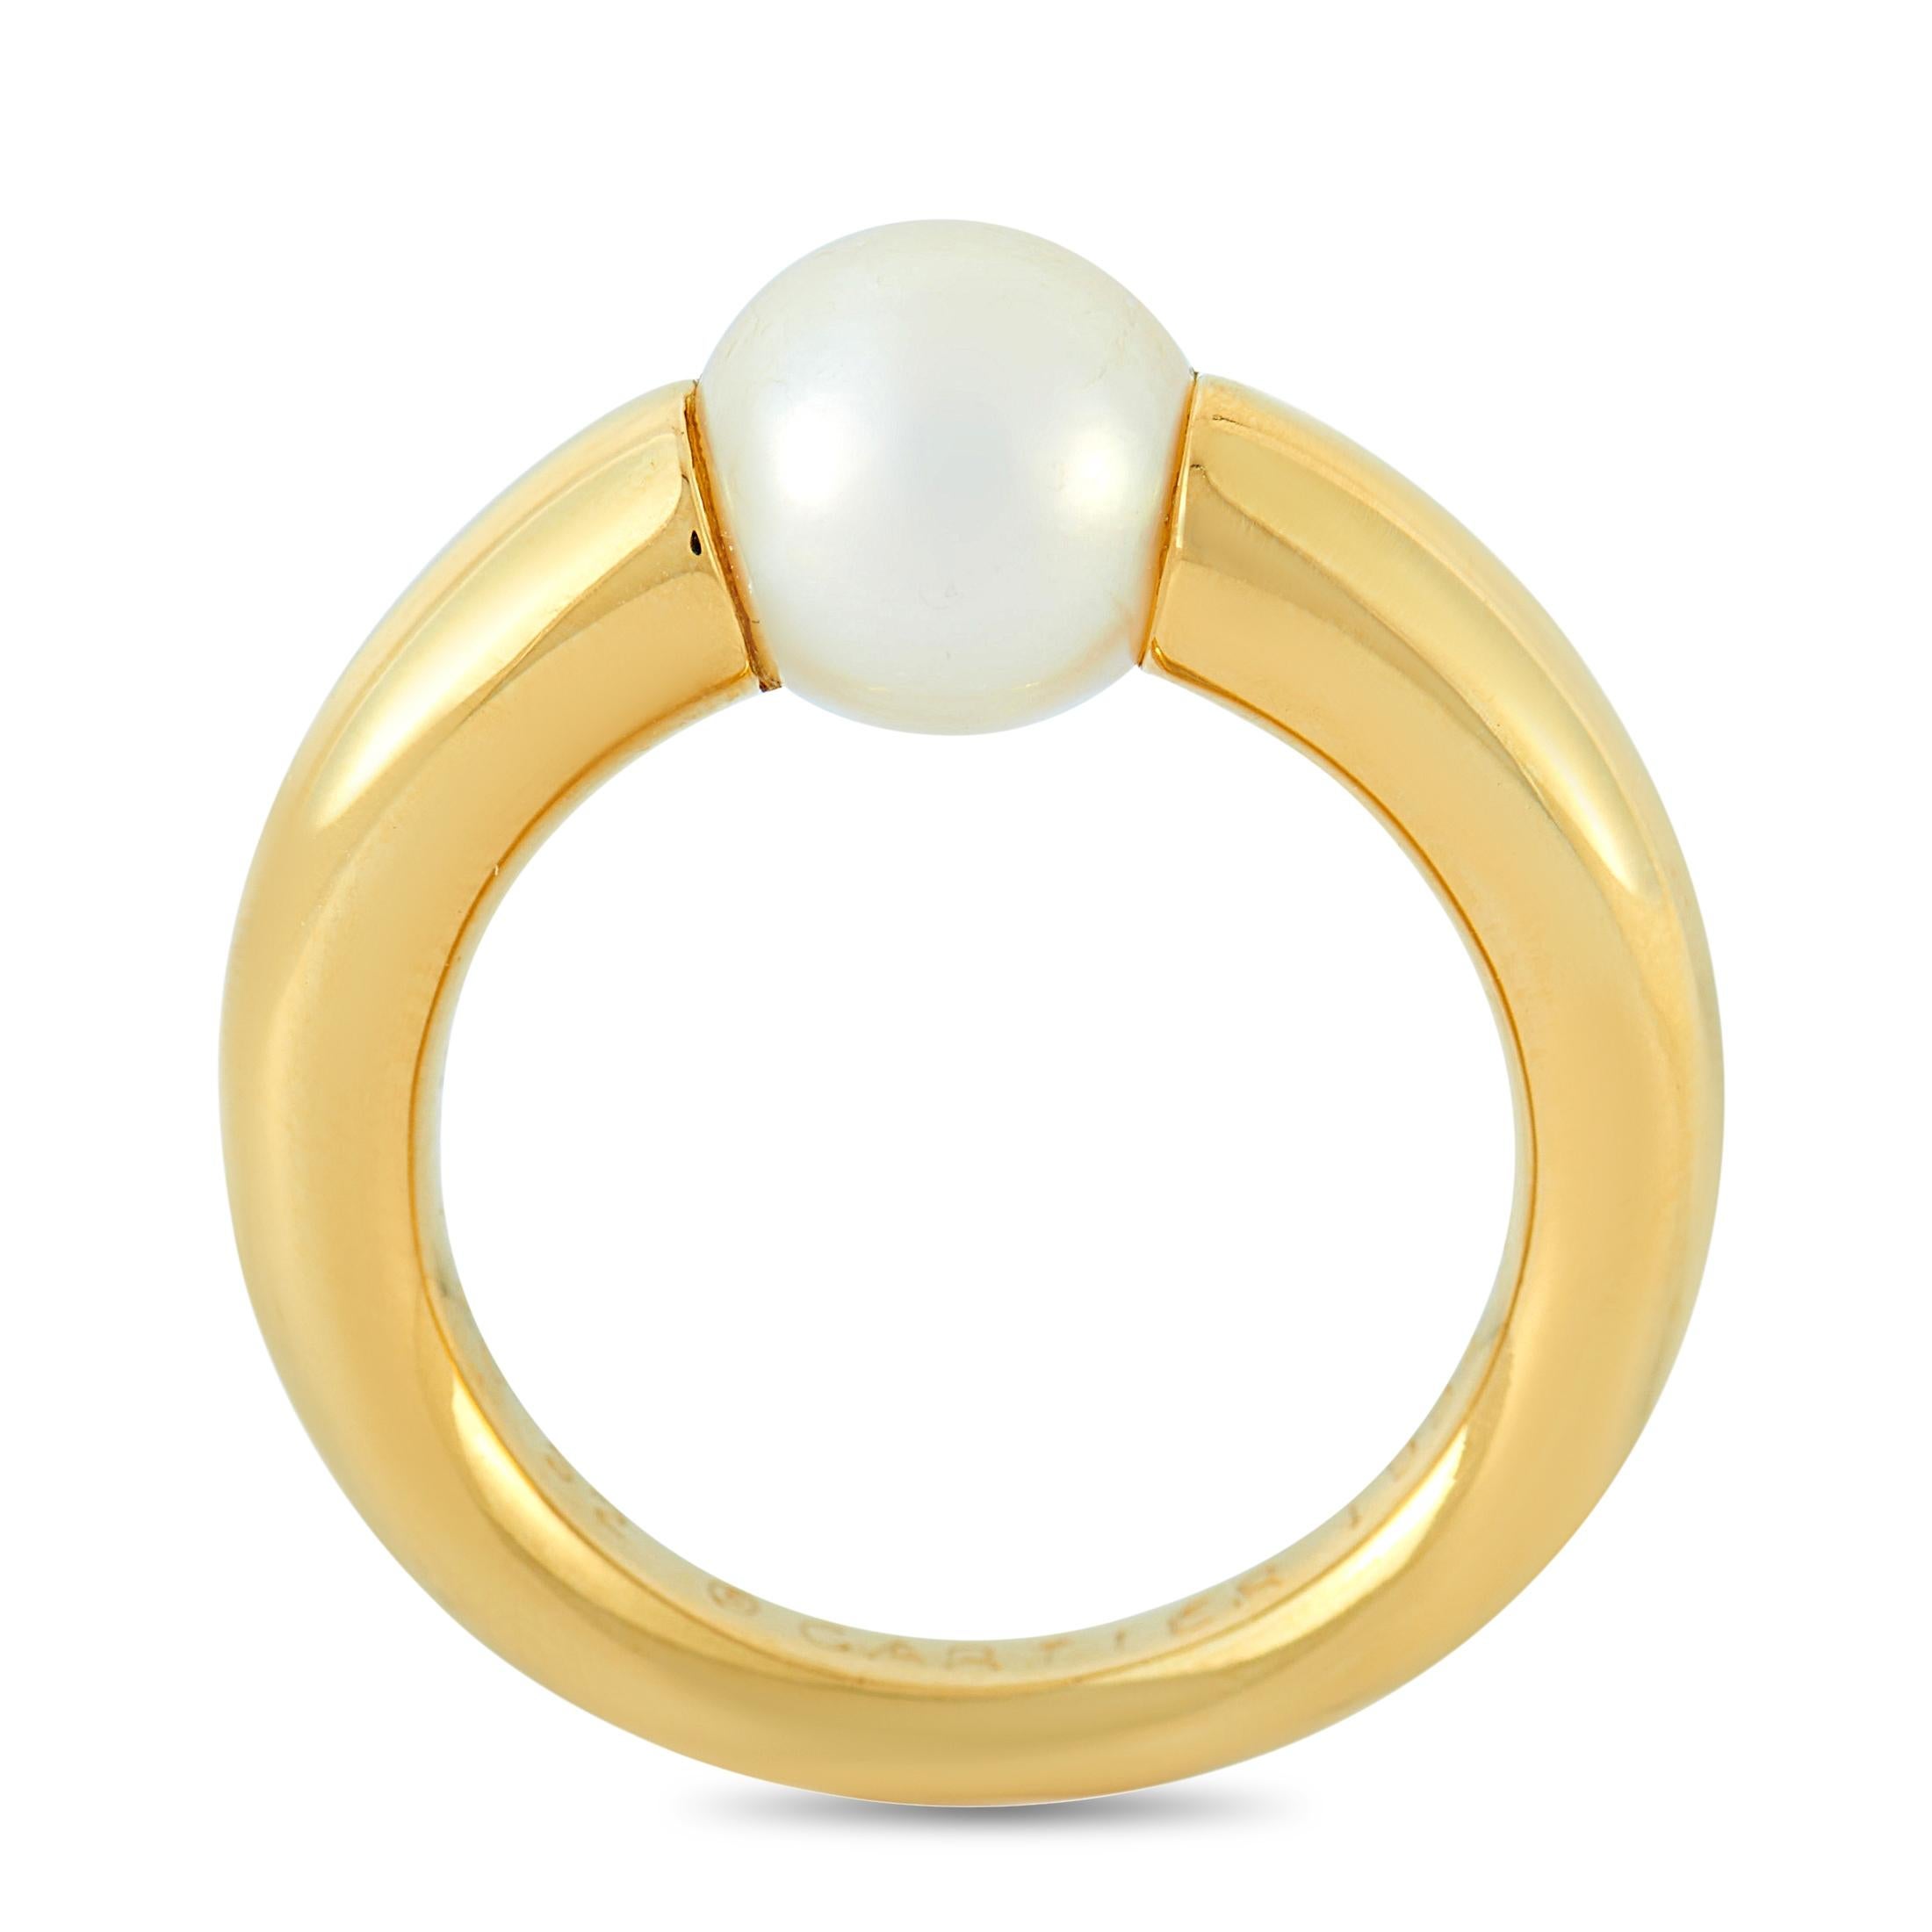 This Cartier ring is made of 18K yellow gold and embellished with a pearl. The ring weighs 11 grams and boasts band thickness of 3 mm and top height of 7 mm, while top dimensions measure 7 by 7 mm.
 
 Offered in estate condition, this jewelry piece